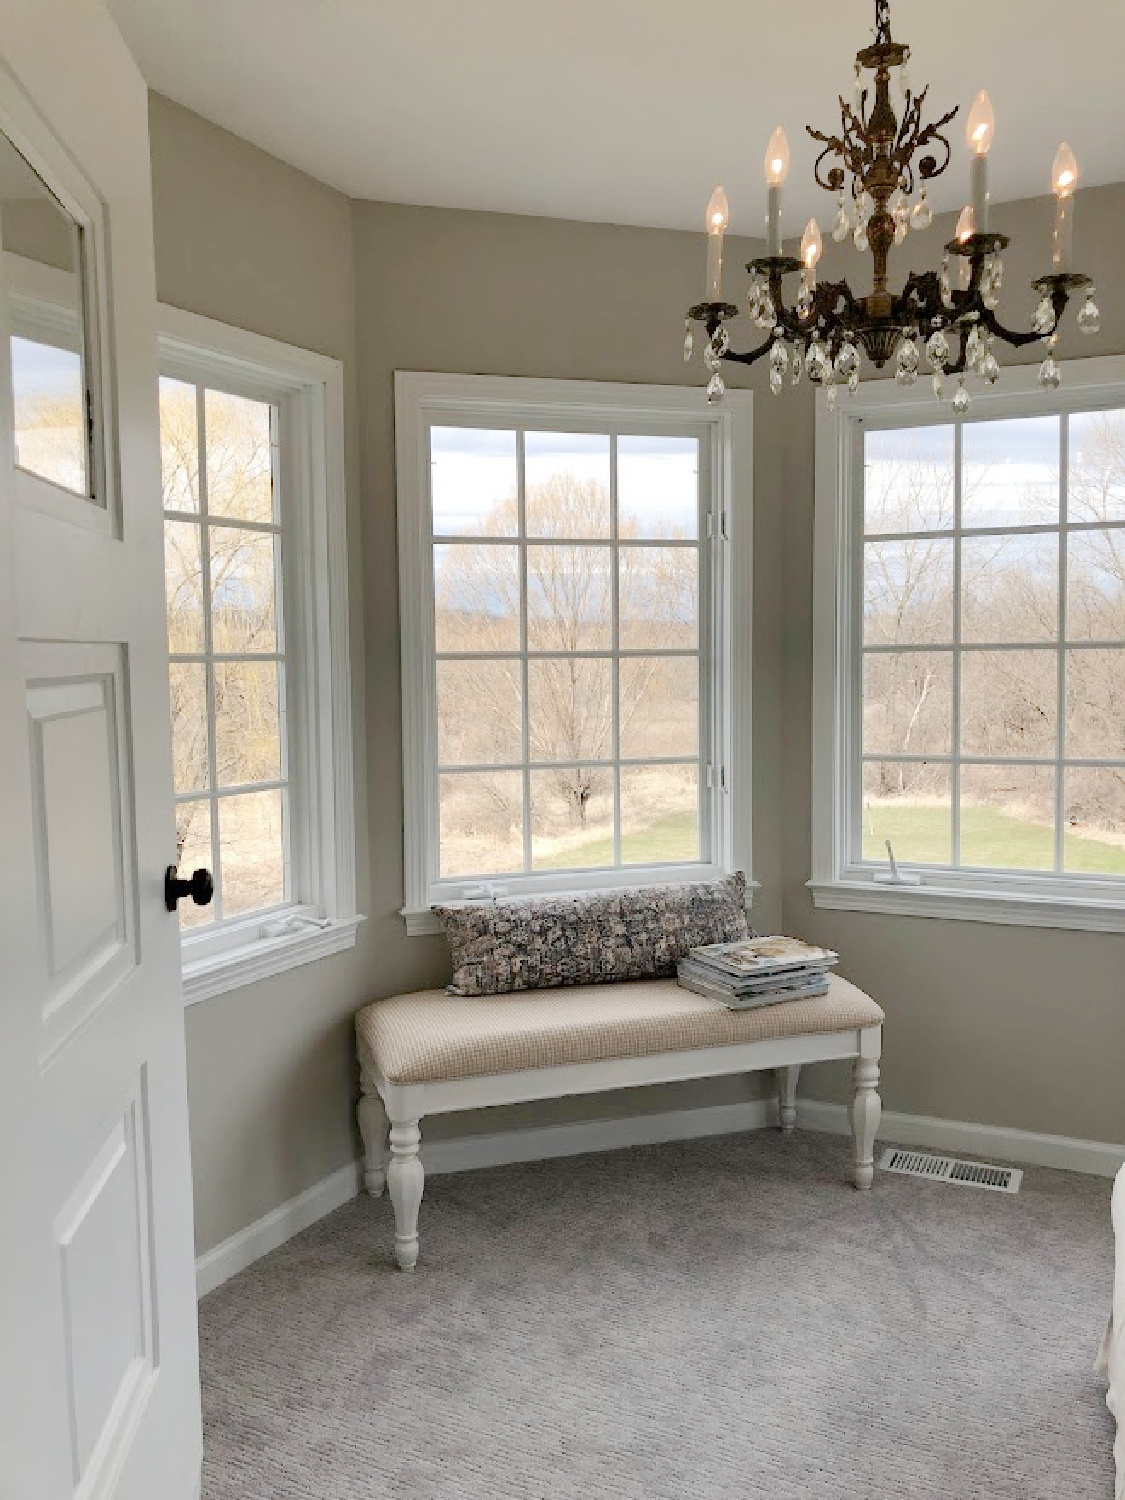 French country bench, antique brass chandelier, and undressed windows in turret sitting room of coastal bedroom remodel (SW Agreeable Gray on walls) at the Georgian - Hello Lovely Studio. #agreeablegray #swagreeablegray